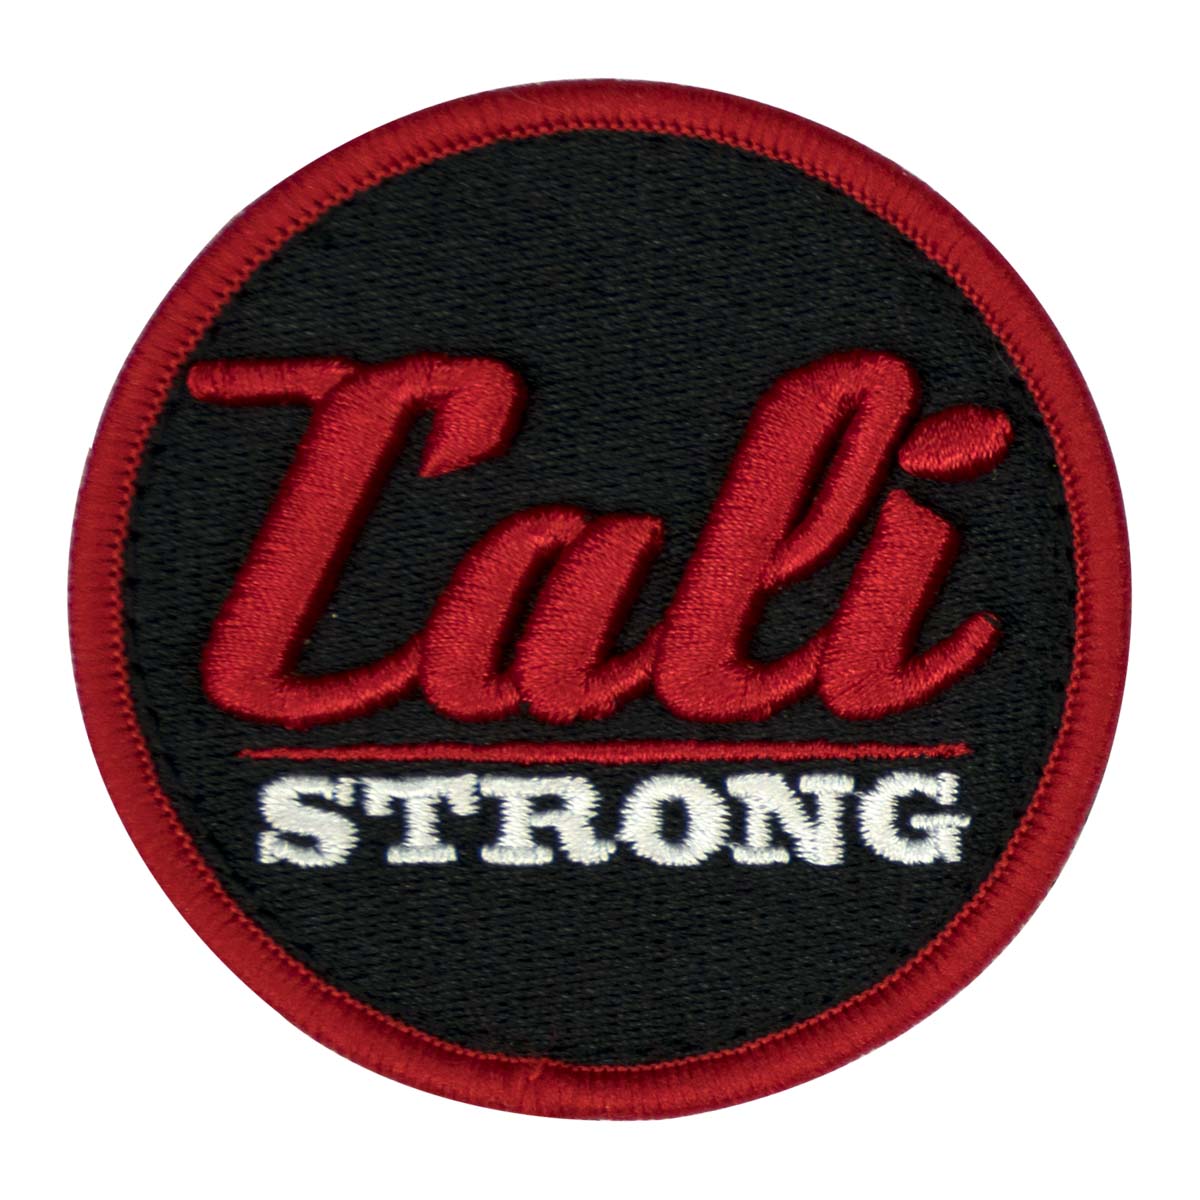 CALI Strong Black Red White Round 3D Hook-and-Loop Morale Patch - Patches - Image 1 - CALI Strong